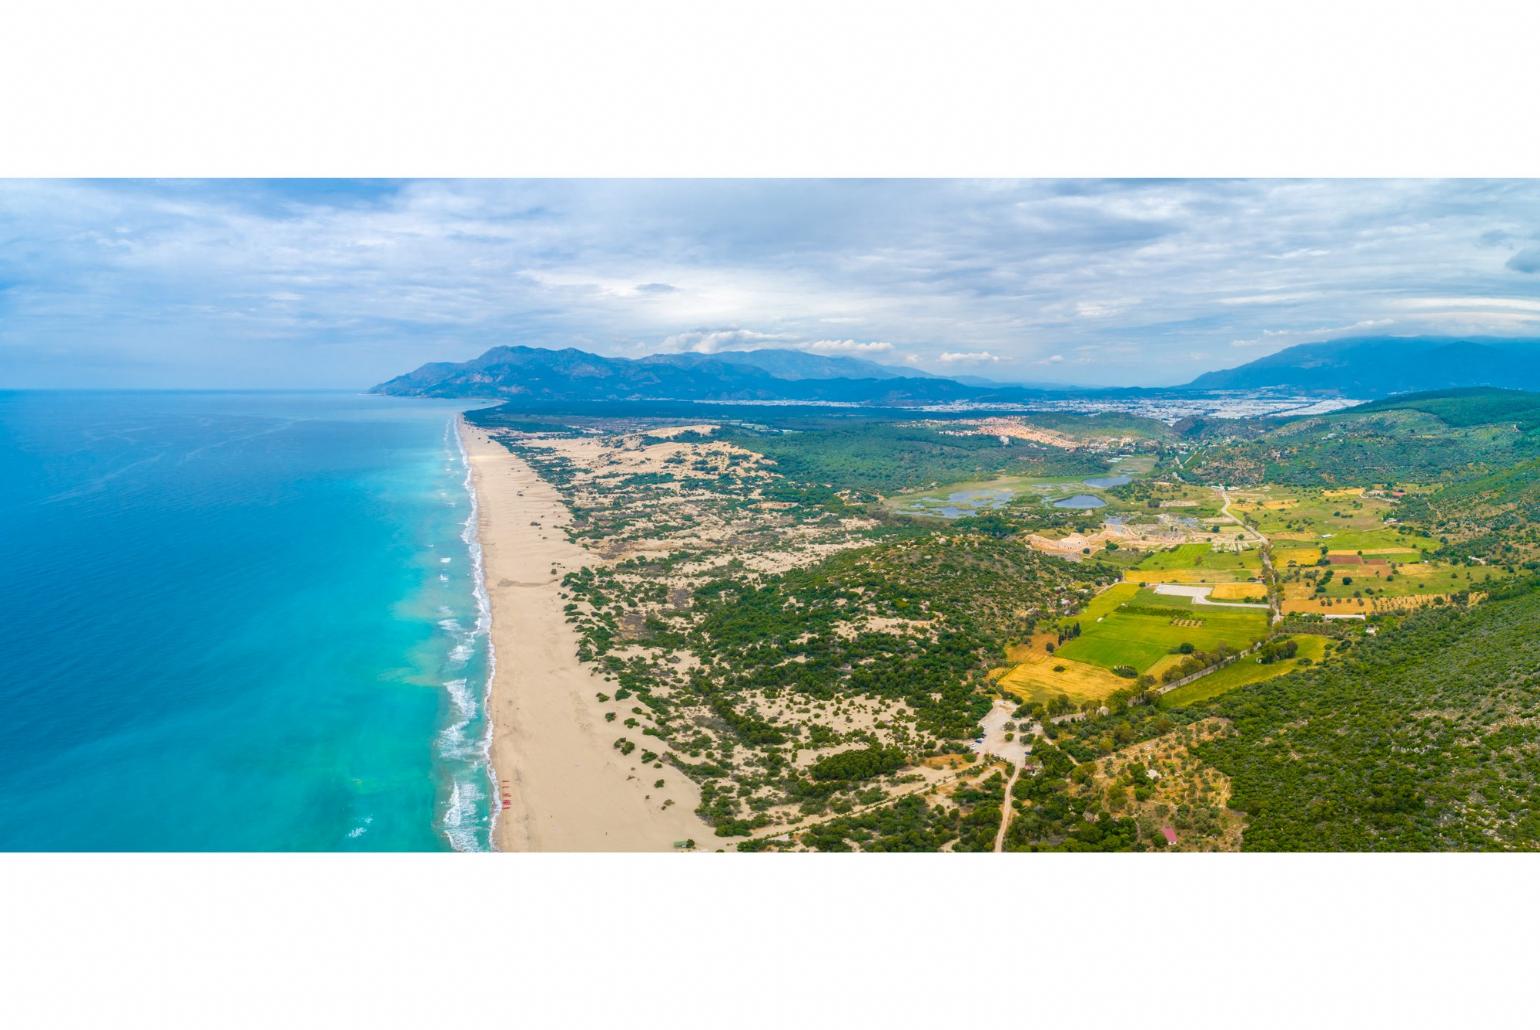 Patara Beach - the longest beach in Turkey and an excellent day-trip from Villa Arykanoos